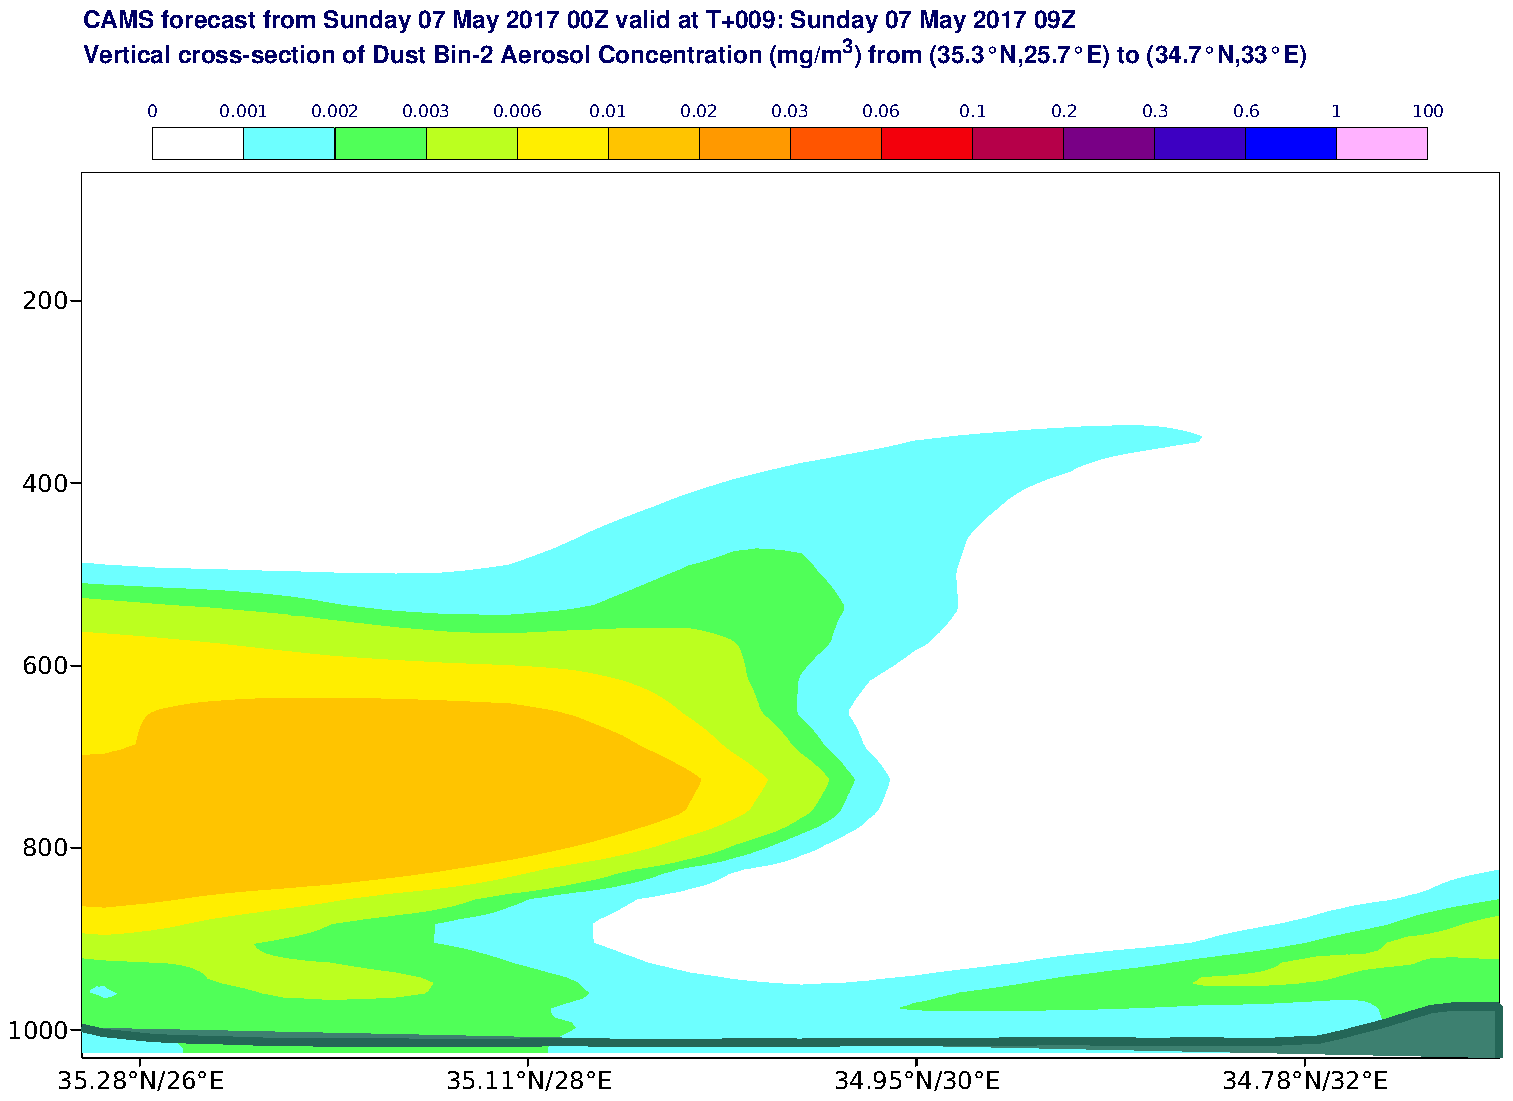 Vertical cross-section of Dust Bin-2 Aerosol Concentration (mg/m3) valid at T9 - 2017-05-07 09:00